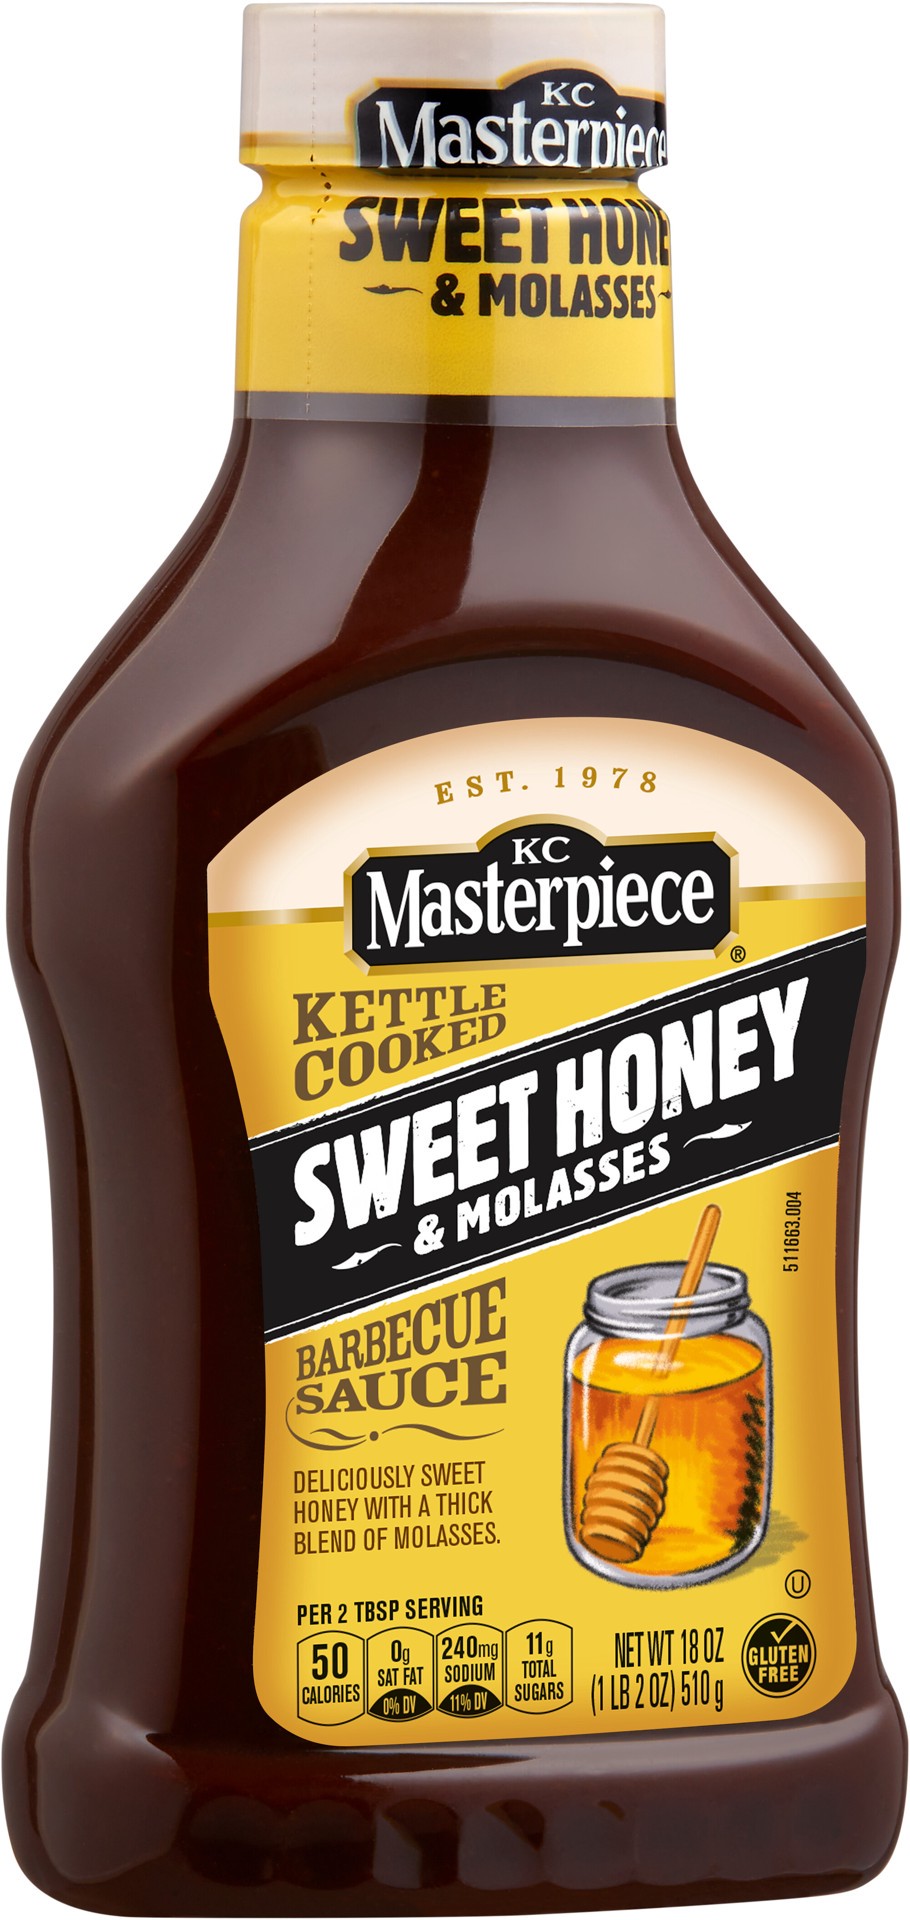 slide 5 of 5, KC Masterpiece Kettle Cooked Sweet Honey & Molasses Barbecue Sauce 18 oz, 18 oz